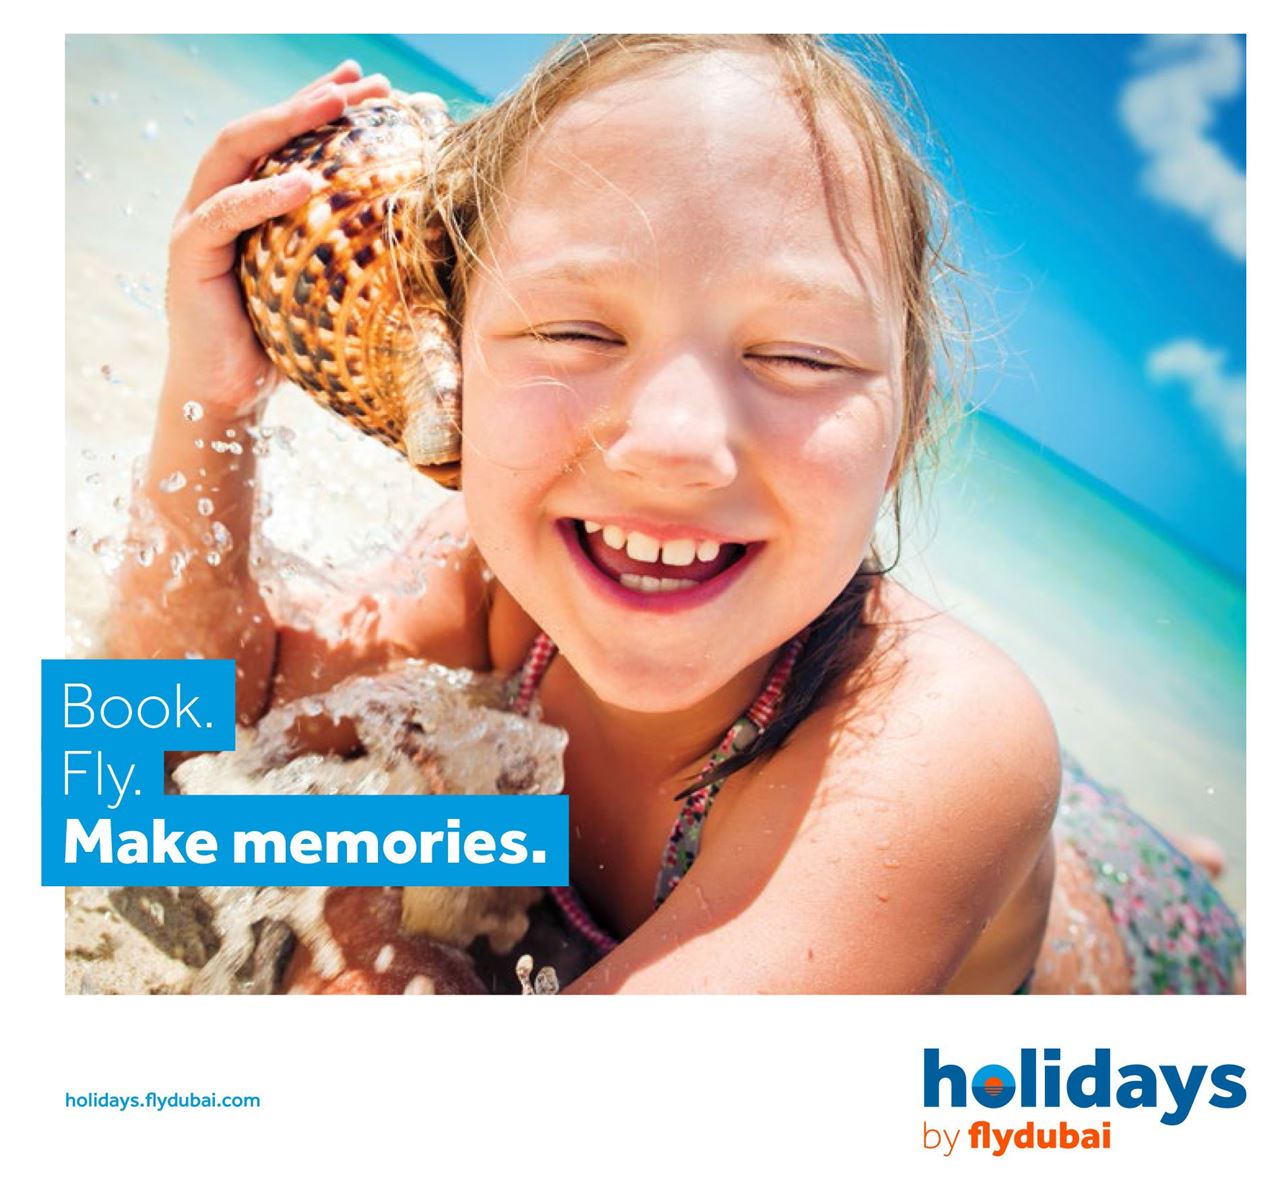 Holidays by flydubai goes on sale (PDF Brochure) - Packages for Destinations among its Latest Product Offering